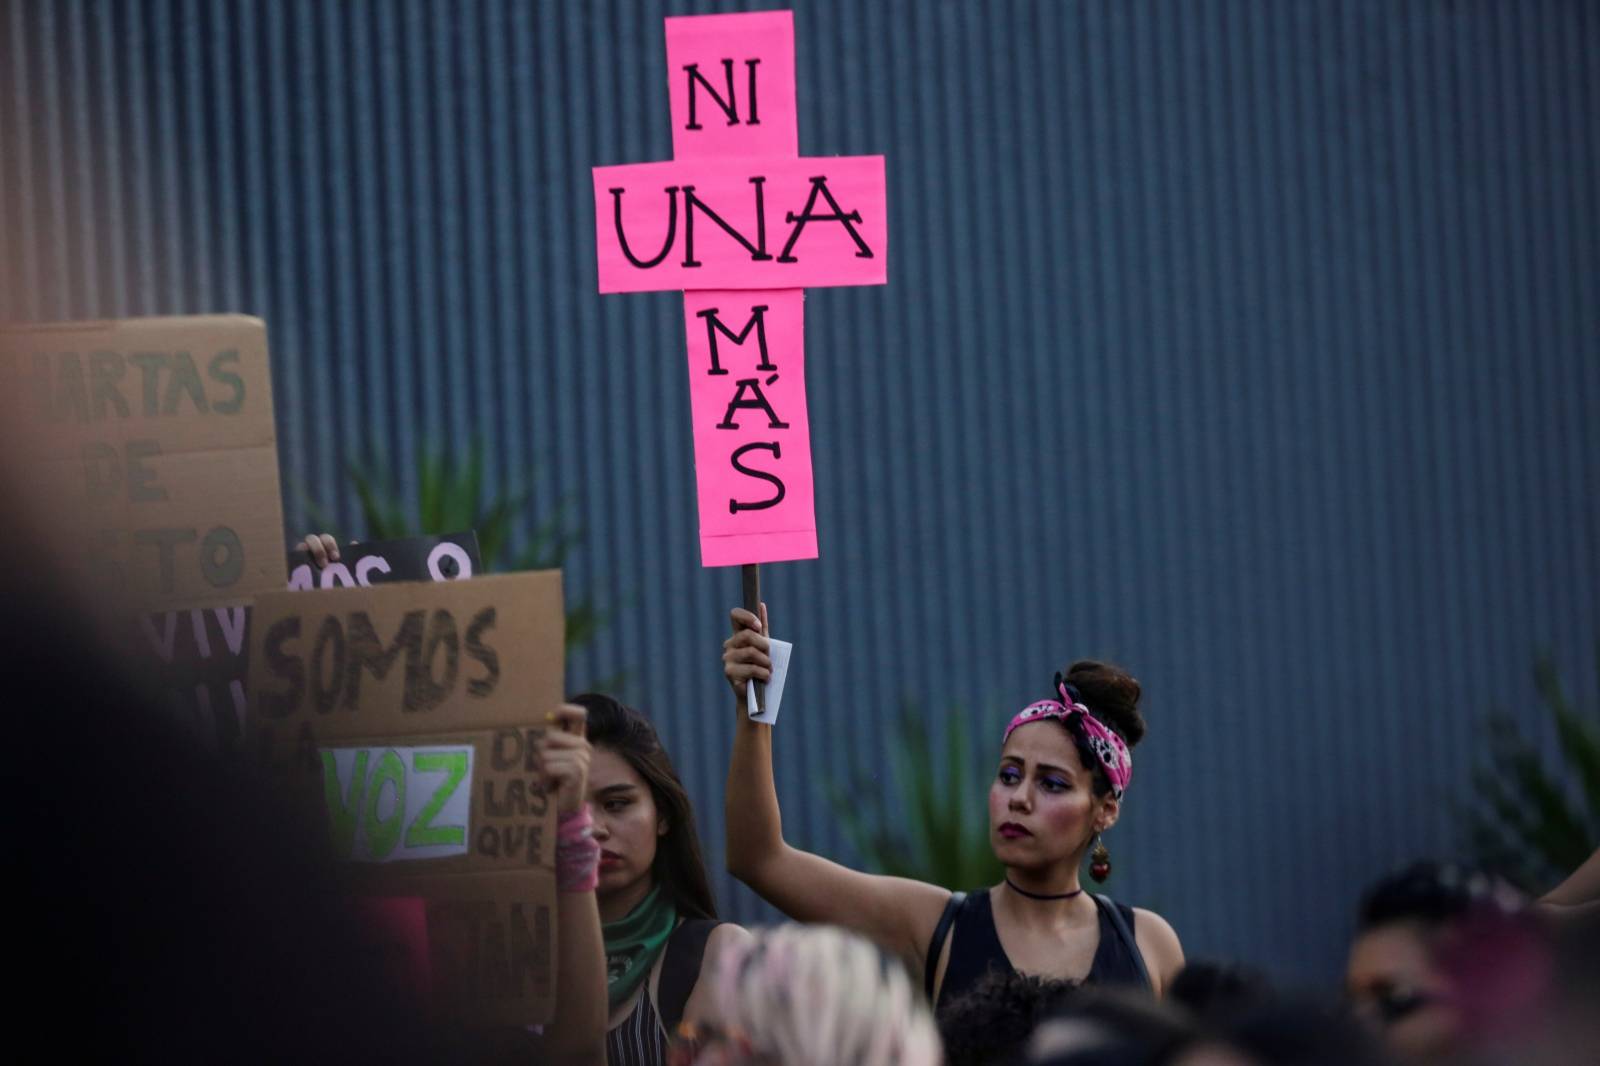 Women demonstrate at the They Don't Protect Me, They Rape Me protest to demand justice for two teenage girls that local media reported were apparently raped by policemen, outside the Nuevo Leon's Attorney General's office in Monterrey